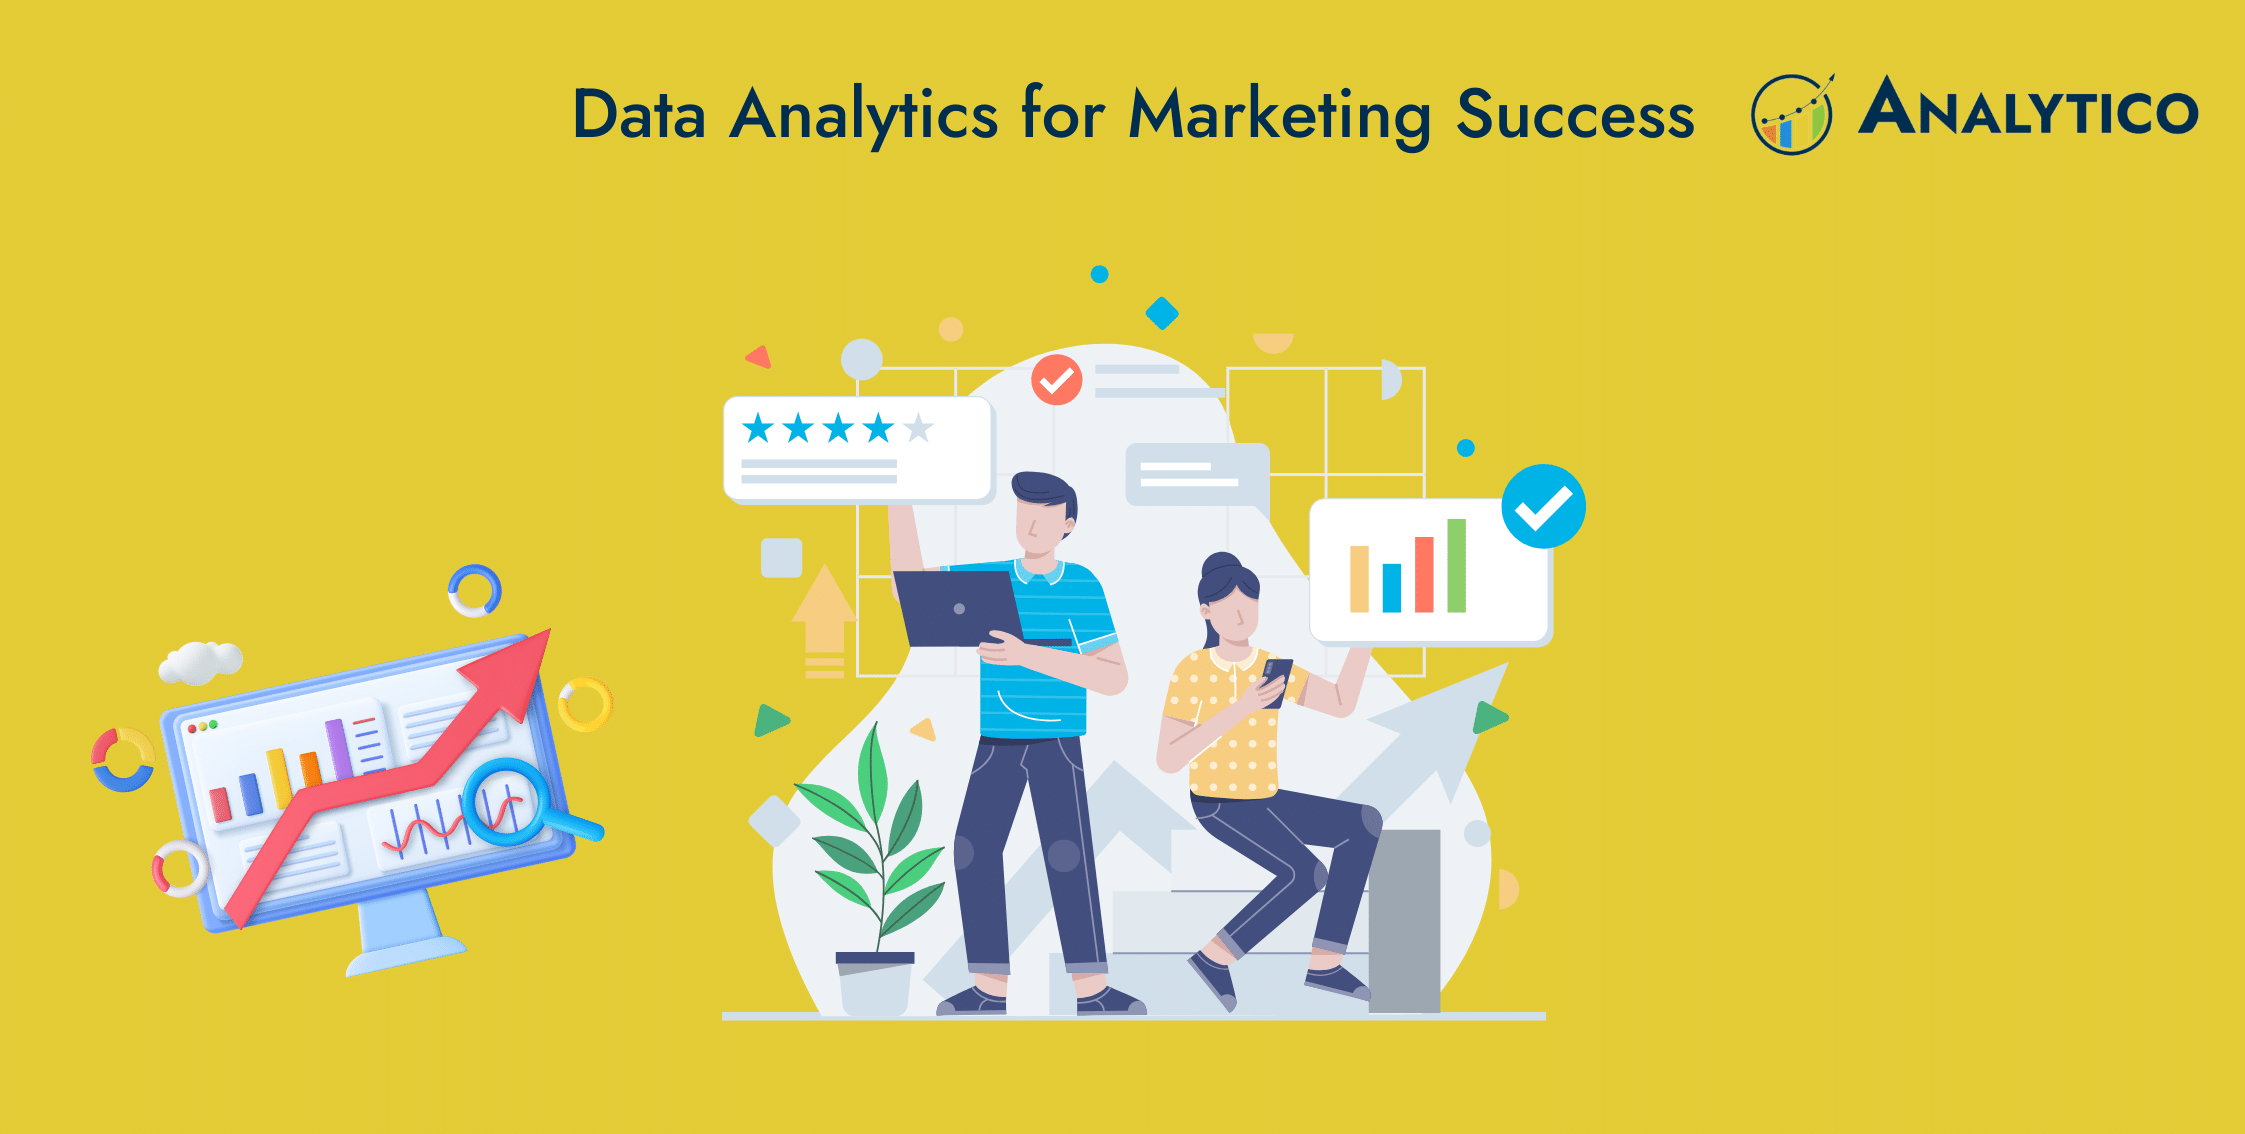 How to use Data Analytics for Marketing Success?